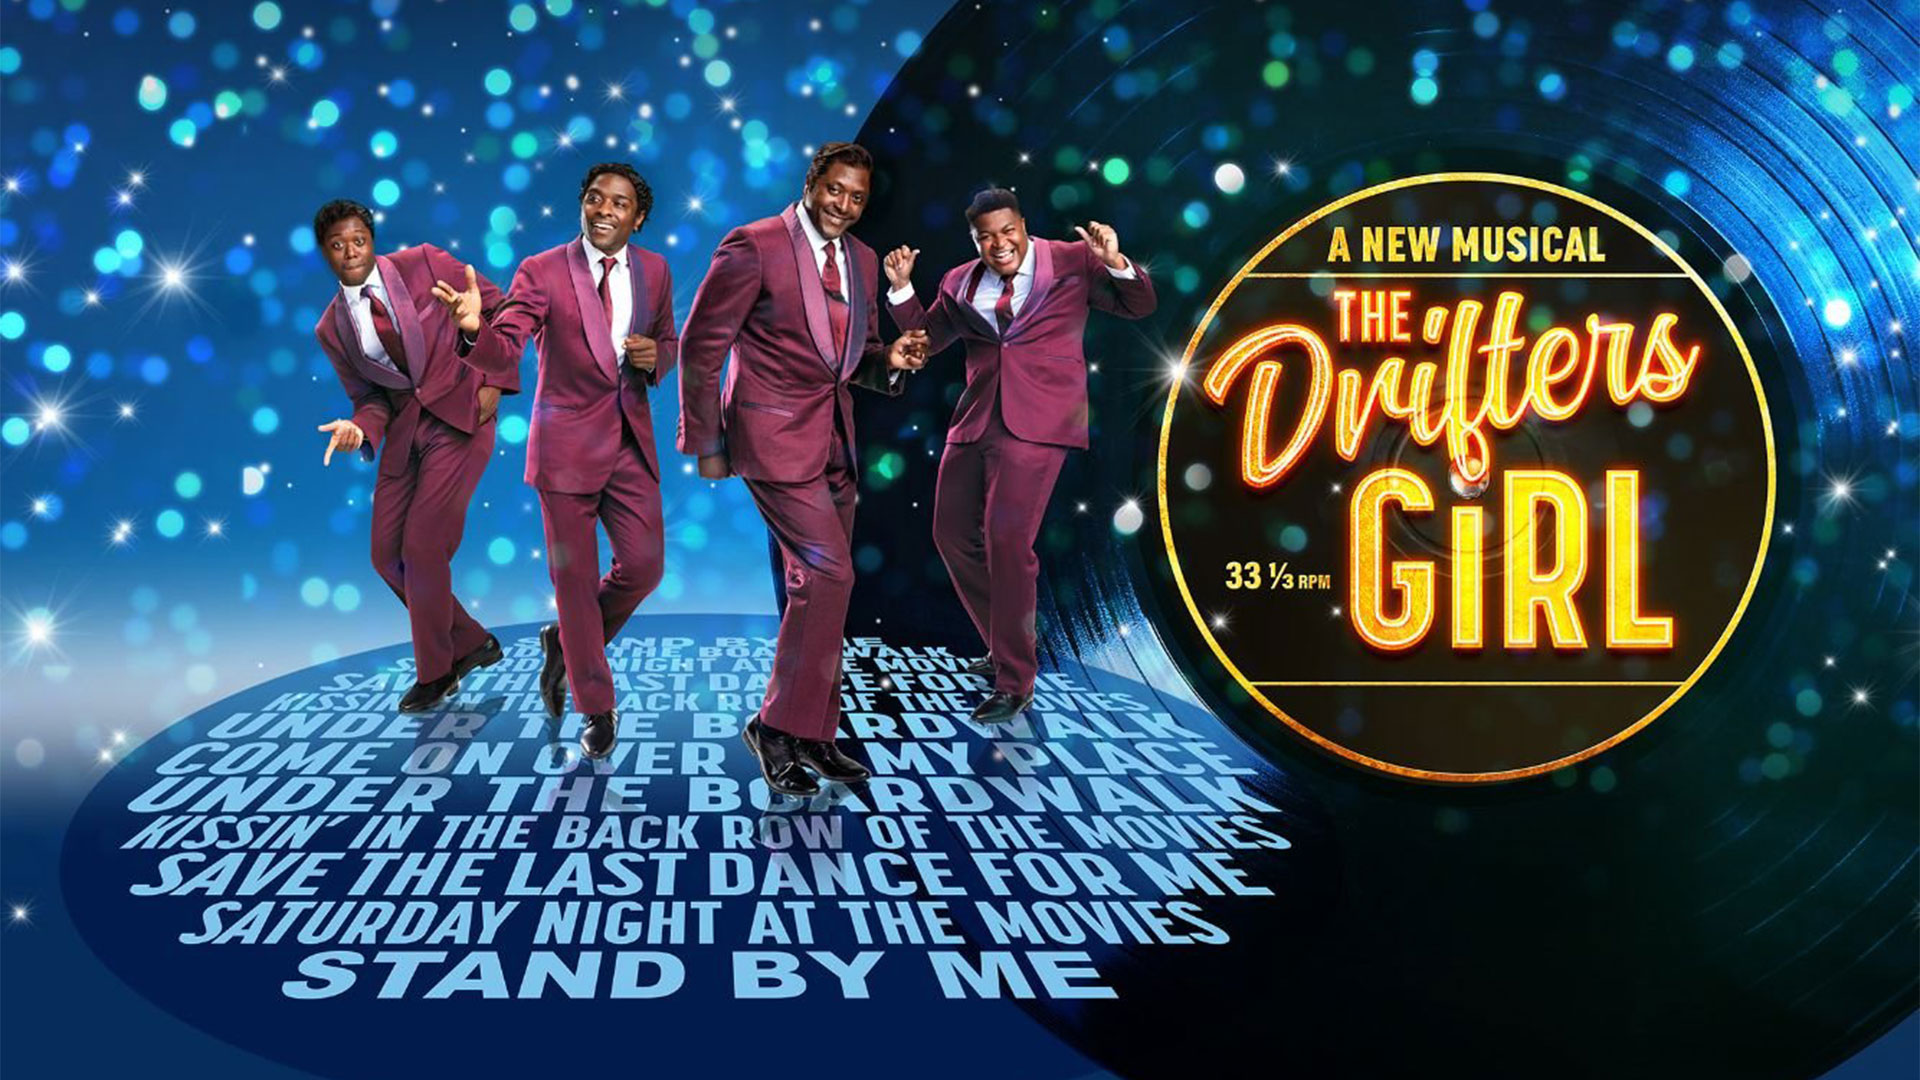 A New Musical THE DRIFTERS GIRL 33 1/3 RPM 'Under The Boardwalk' 'Come On Over To My Place' 'Kissin' In The Back Row Of The Movies' 'Save The Last Dance For Me' 'Saturday Night At The Movies' Stand By Me'